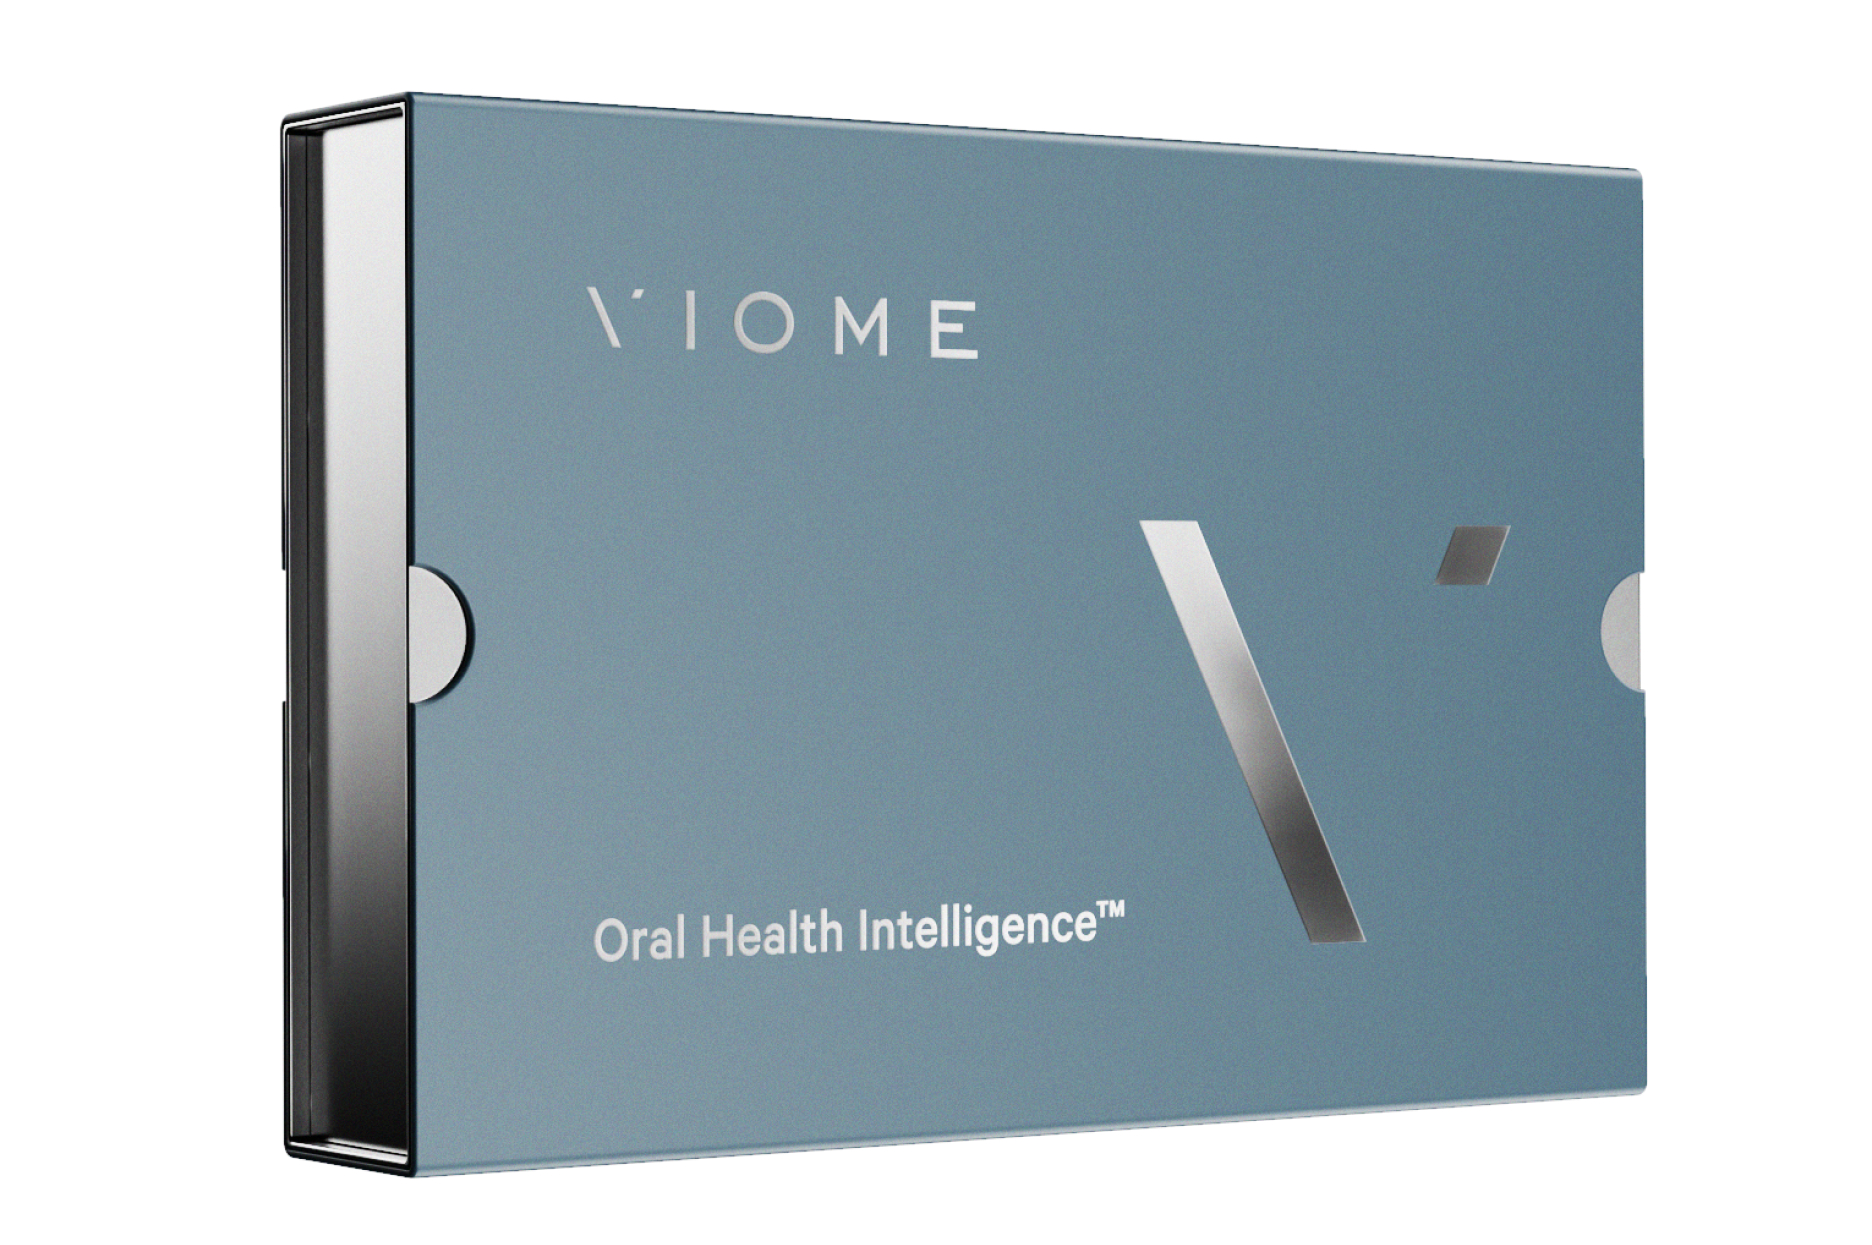 The Viome Oral Health Intelligence Test: an oral microbiome health test packaged in a blue reflective box